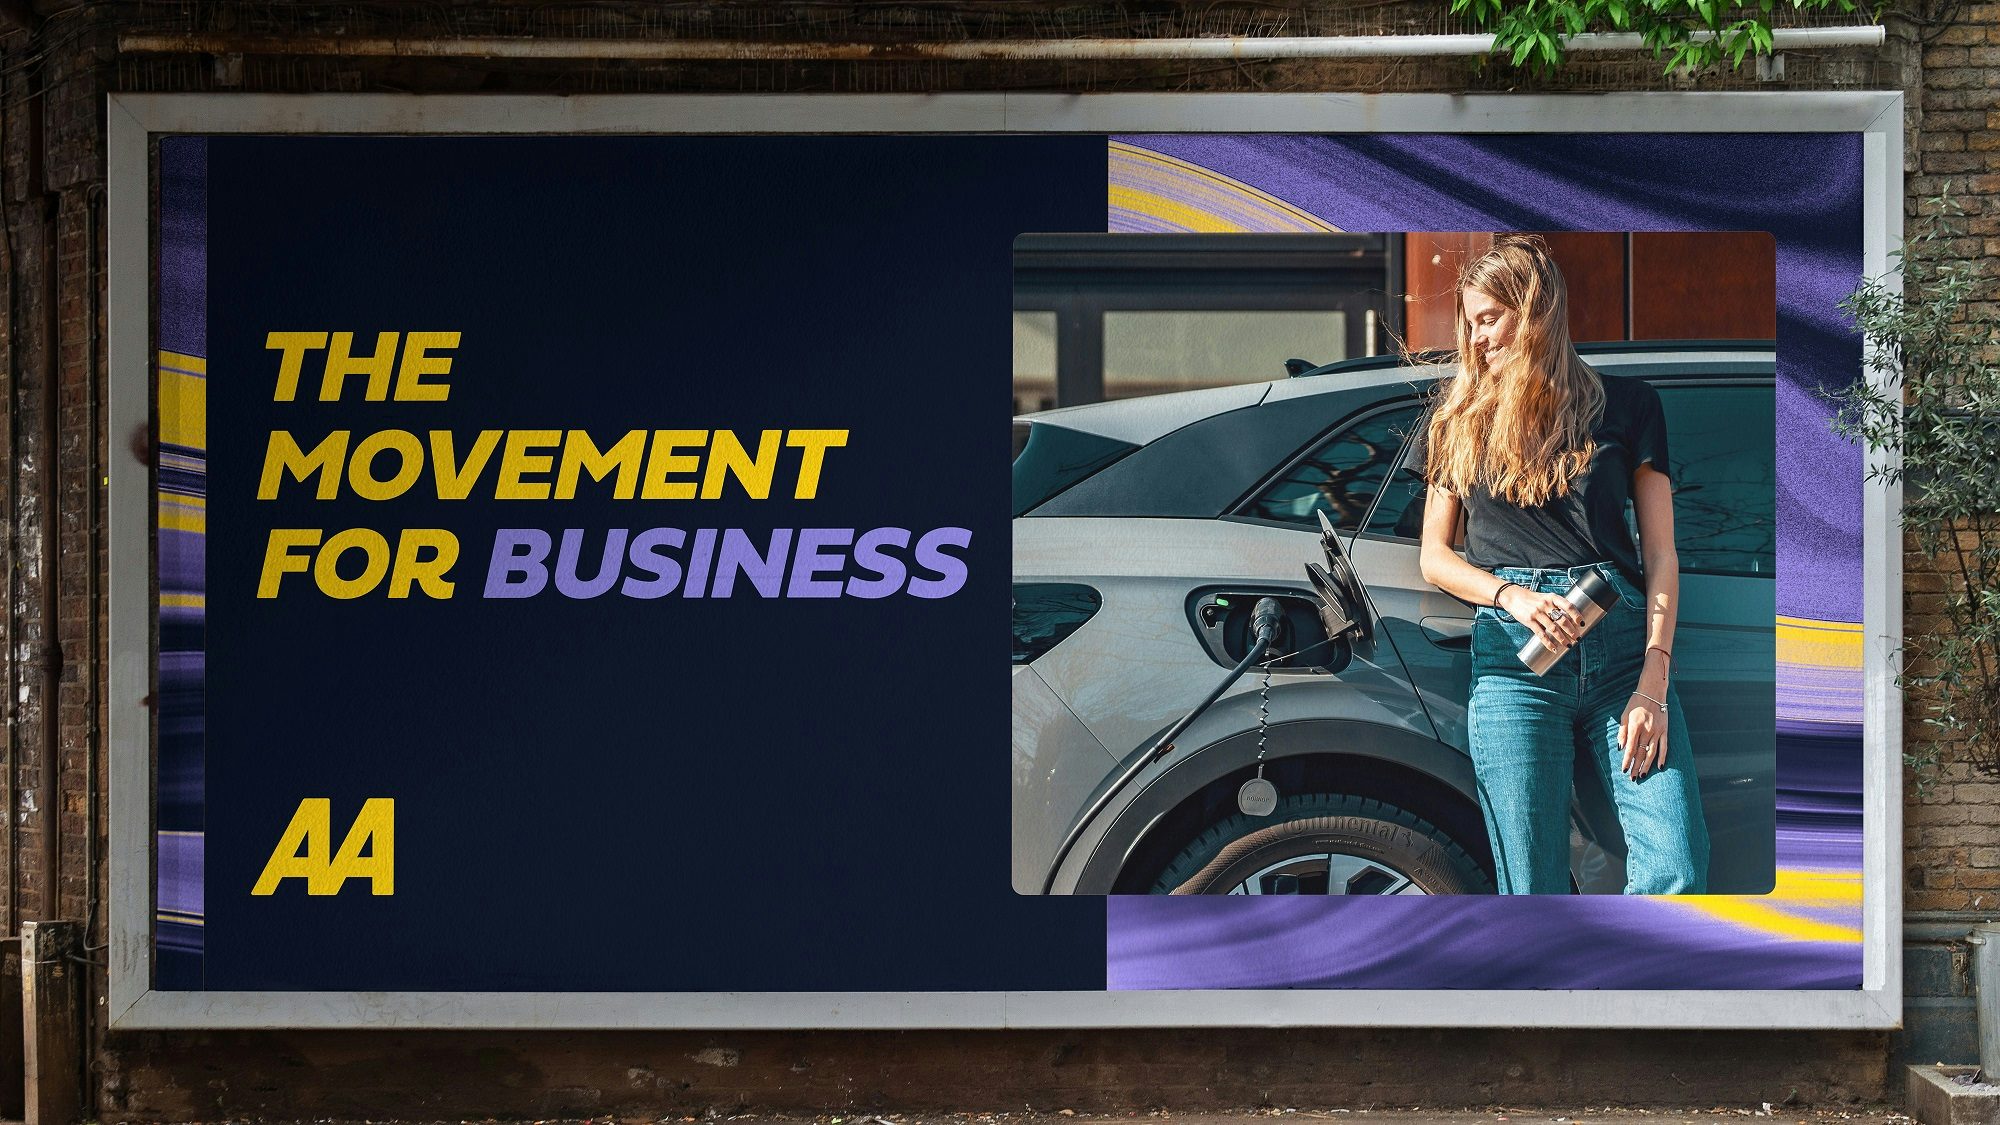 Image shows the AA's new branding on a landscape billboard headlined 'the movement for business' in yellow and purple font, next to a photo of a person leaning on a car while it is being refuelled